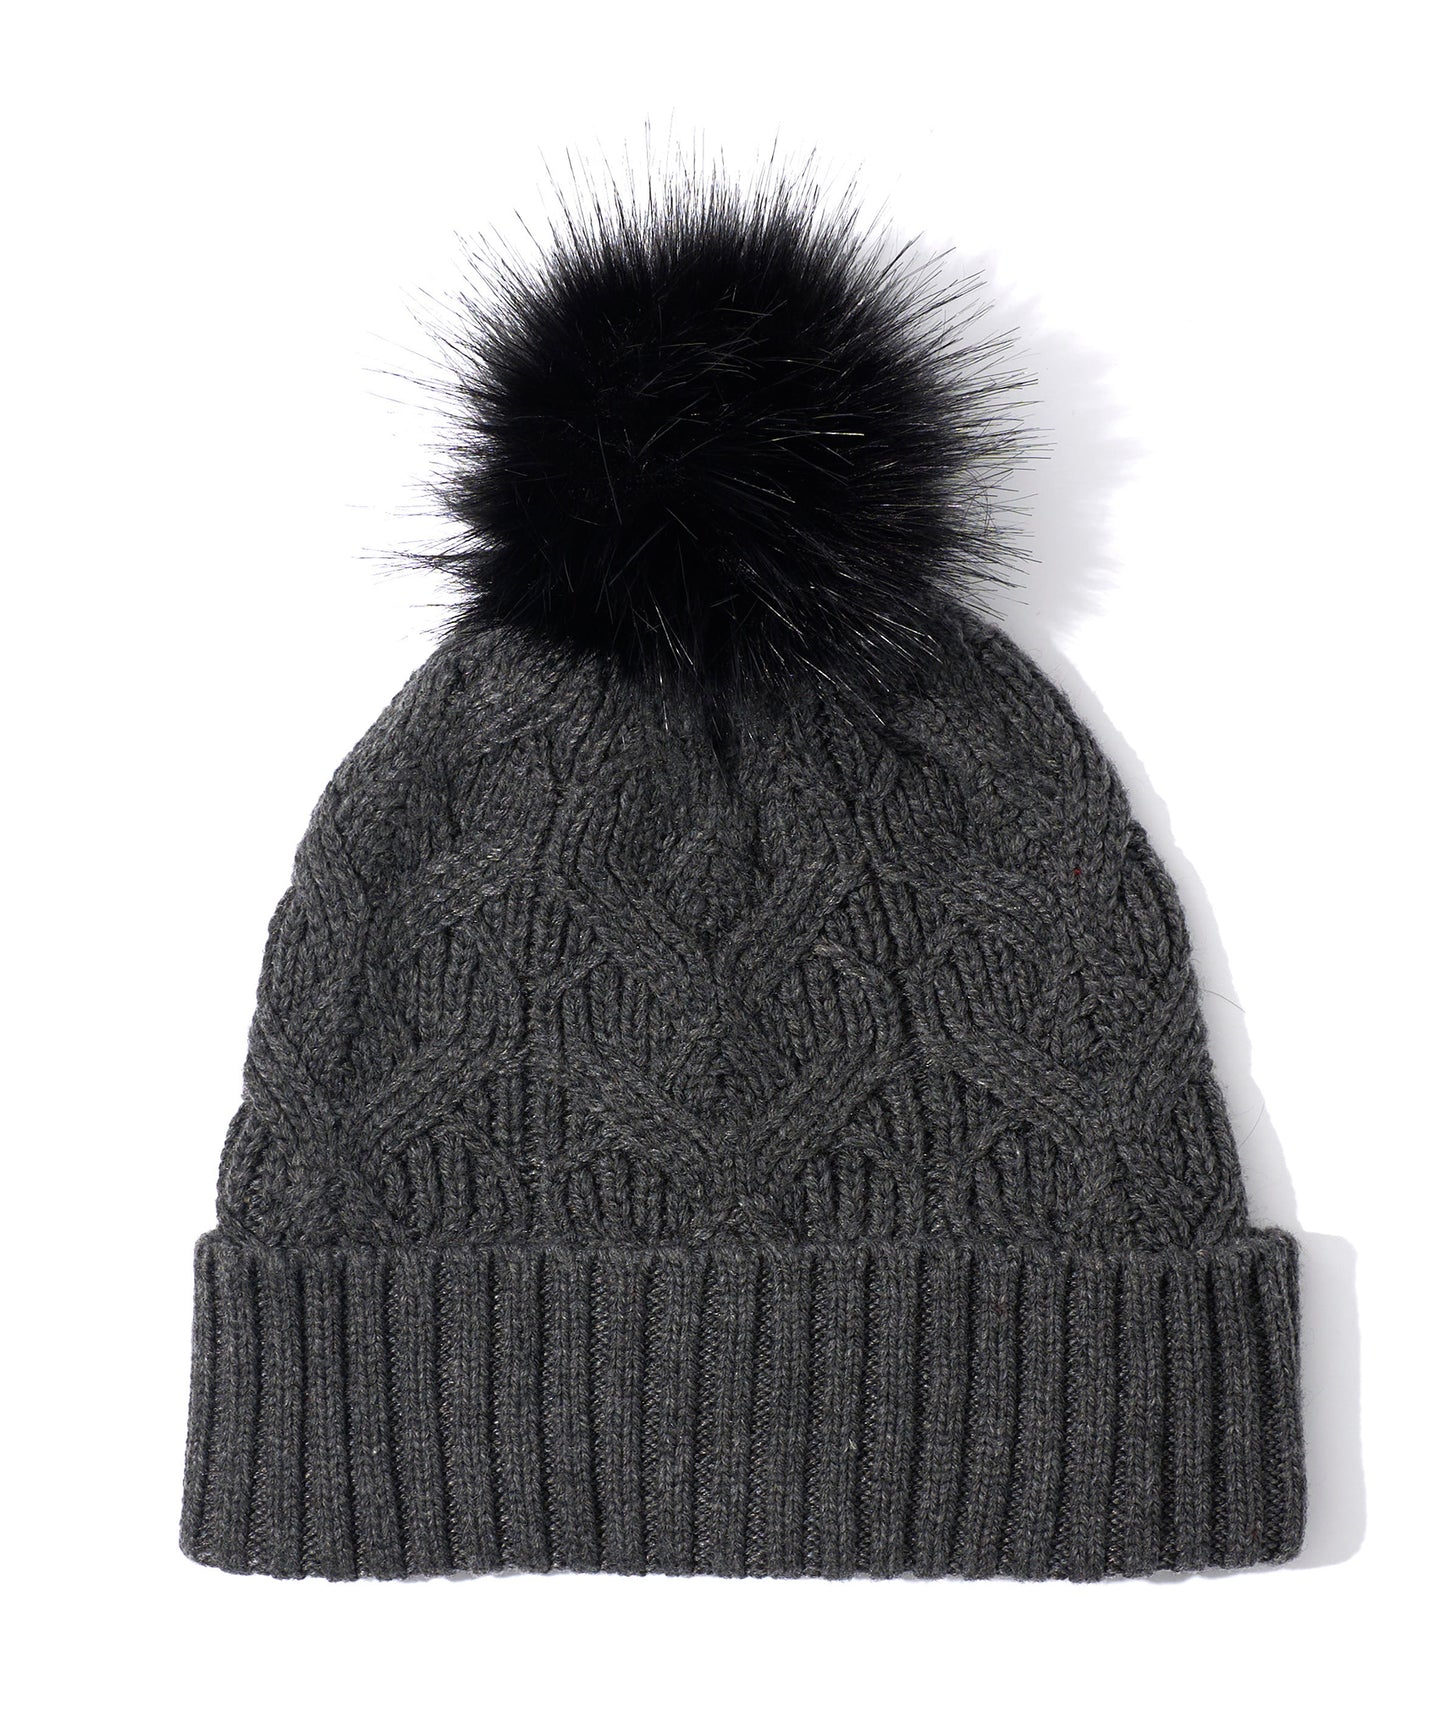 Loopy Cable Pom Hat in color Charcoal